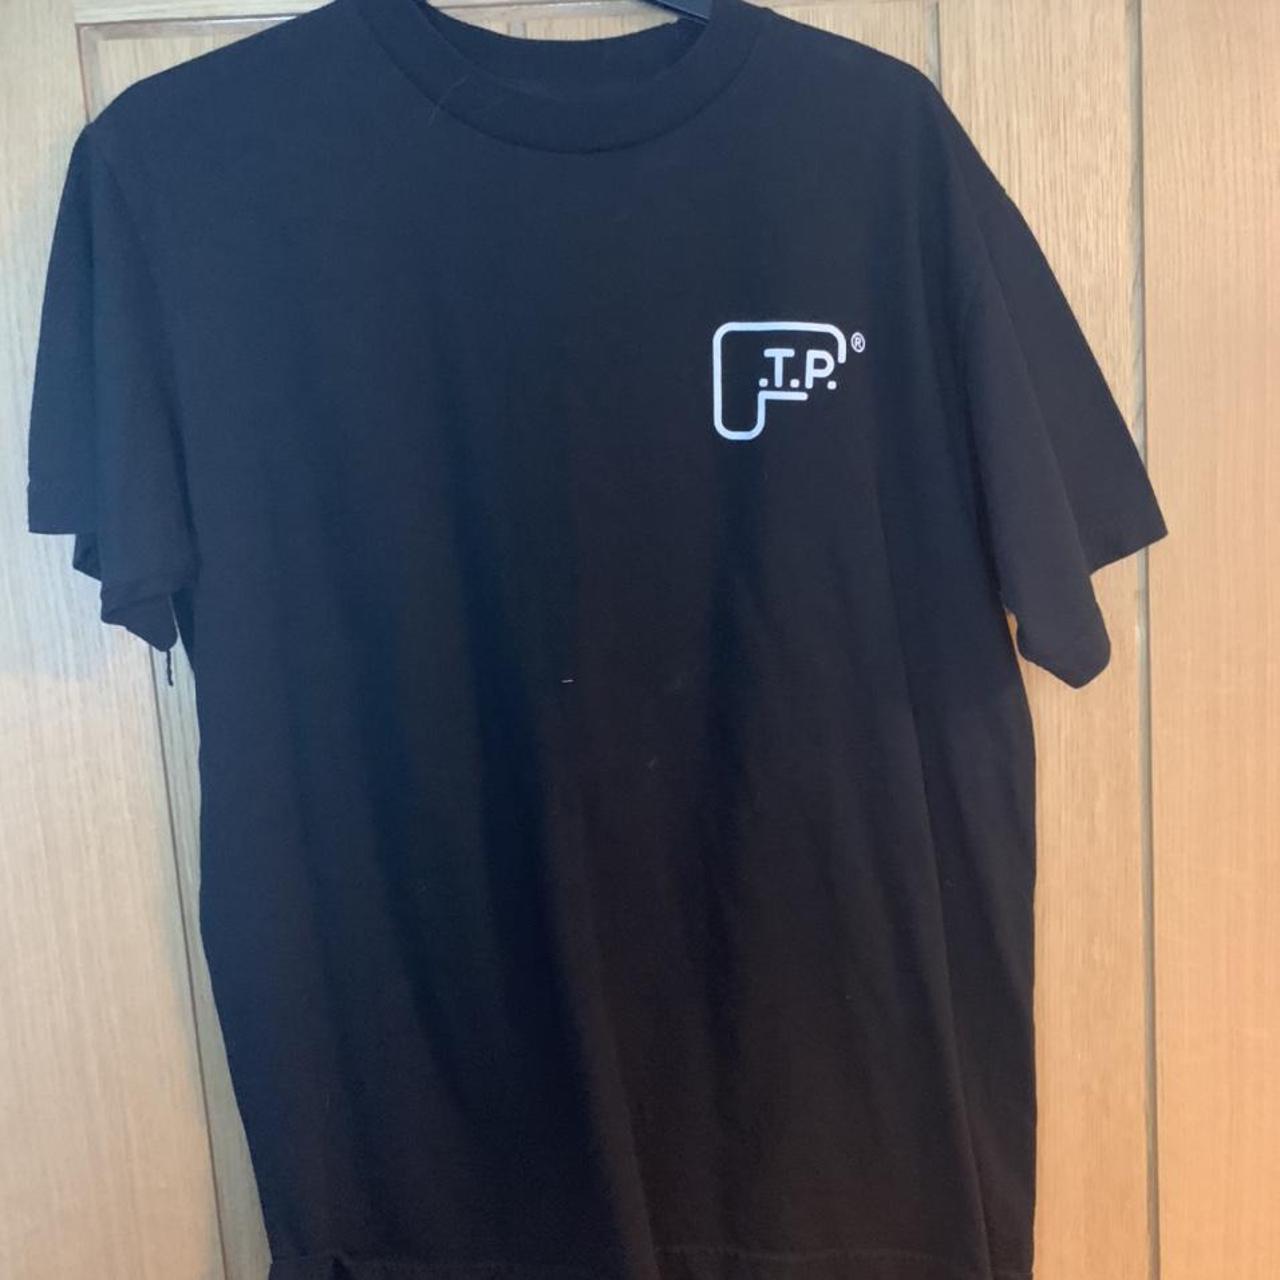 Product Image 1 - FTP 9MM Tee, Black, size